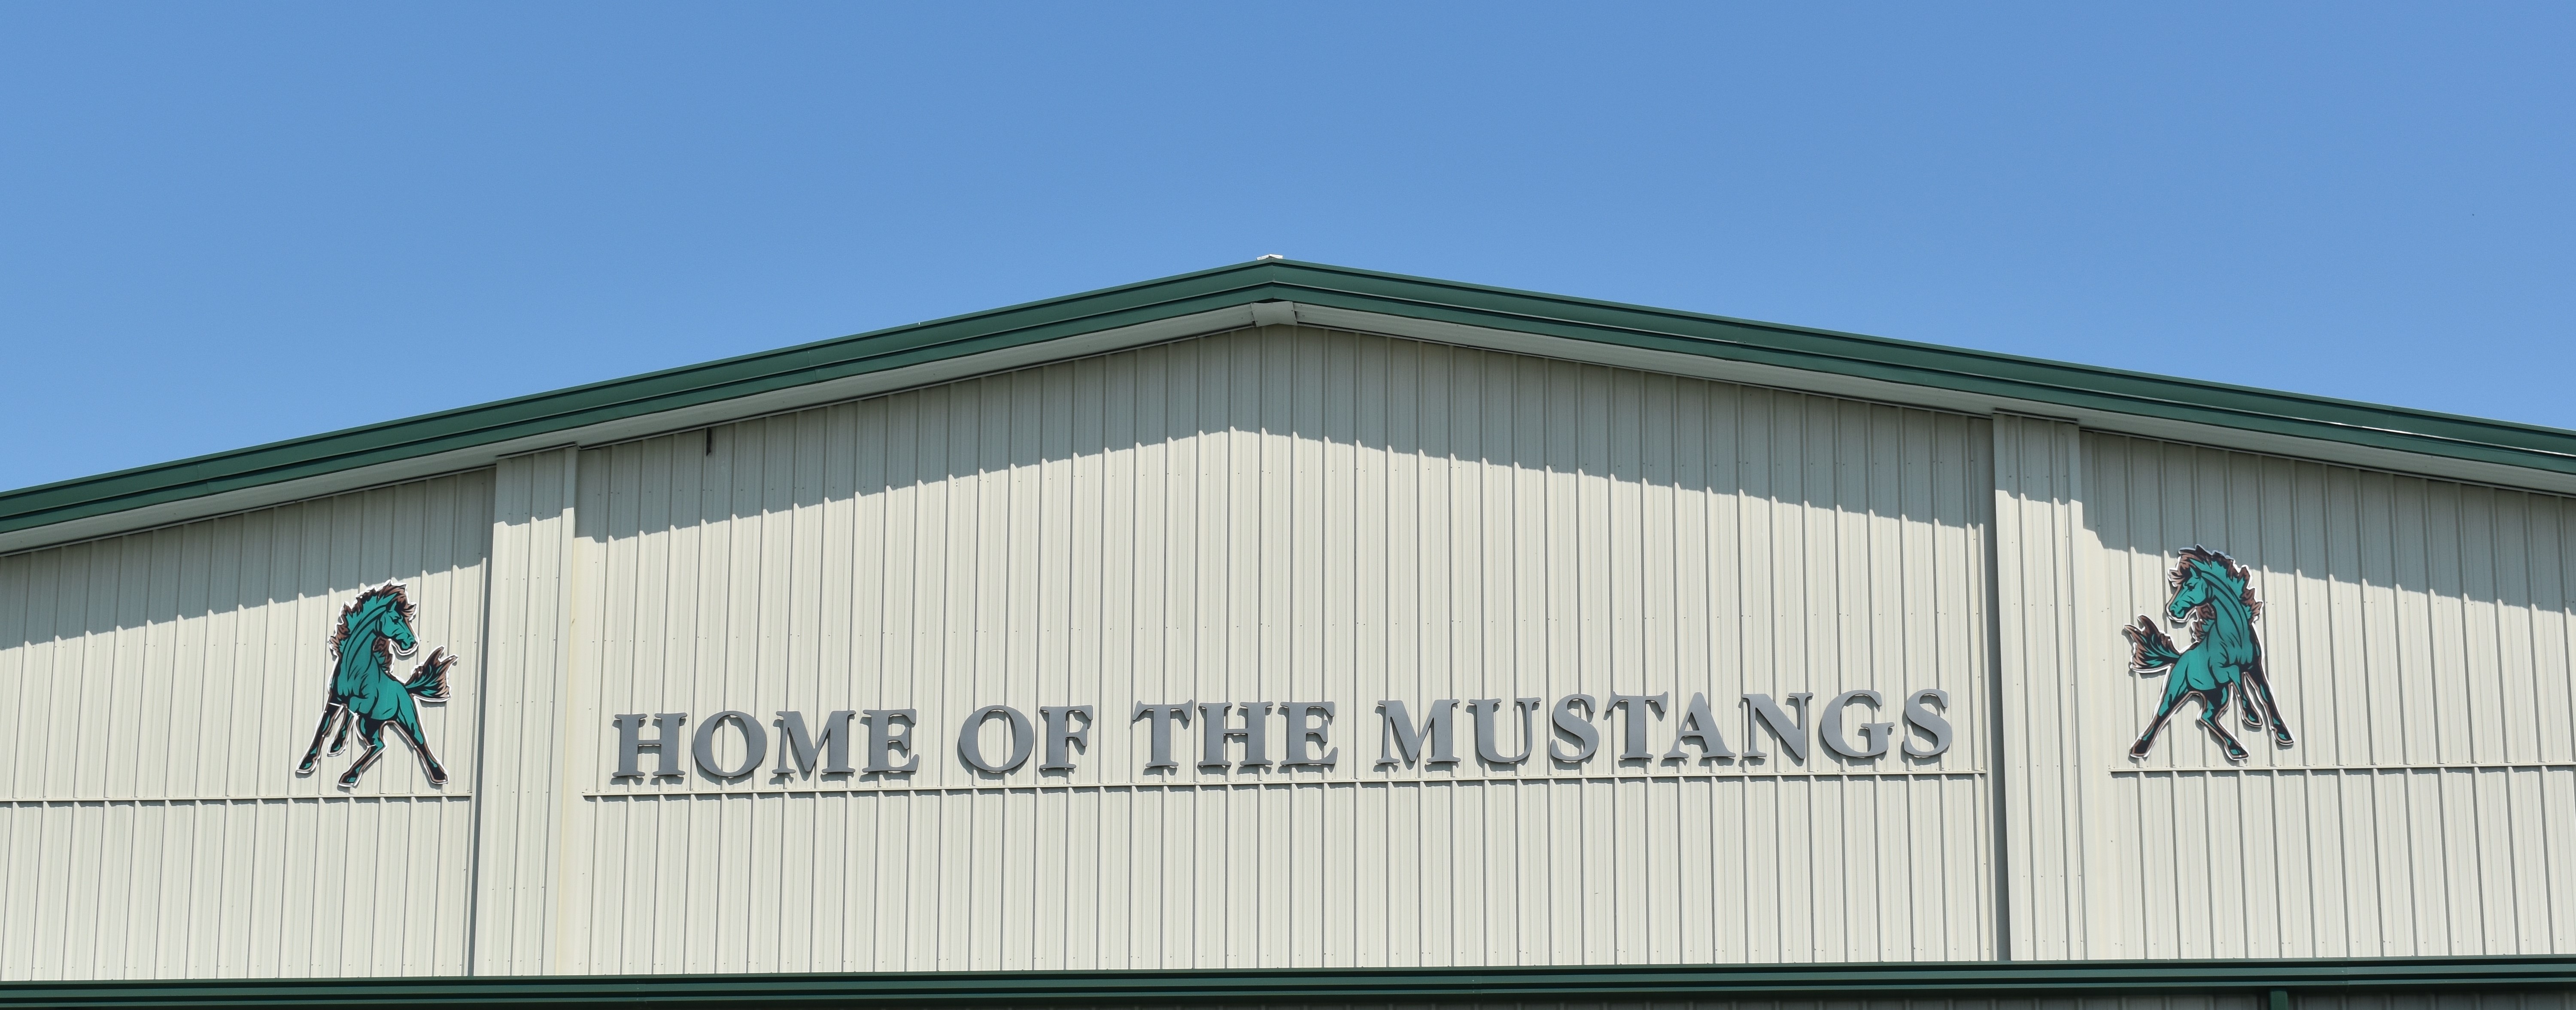 Hoxie Mustangs Gym Logo "Home of the Mustangs"